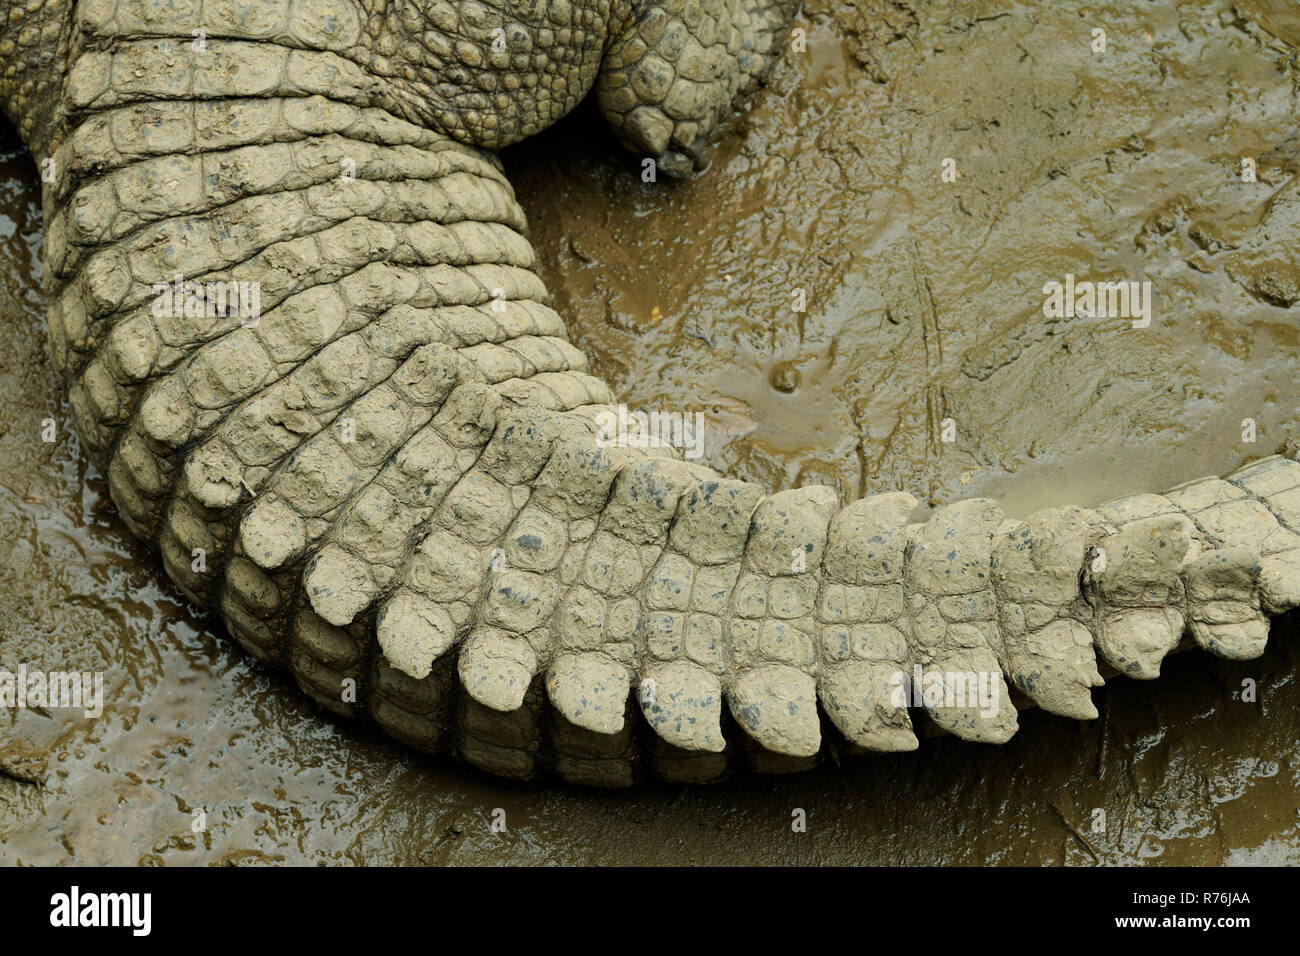 Durban, KwaZulu-Natal, South Africa, close-up, detail, rows and patterns on curved tail, Nile Crocodile, Crocodylus niloticus, animal lying on wet mud Stock Photo